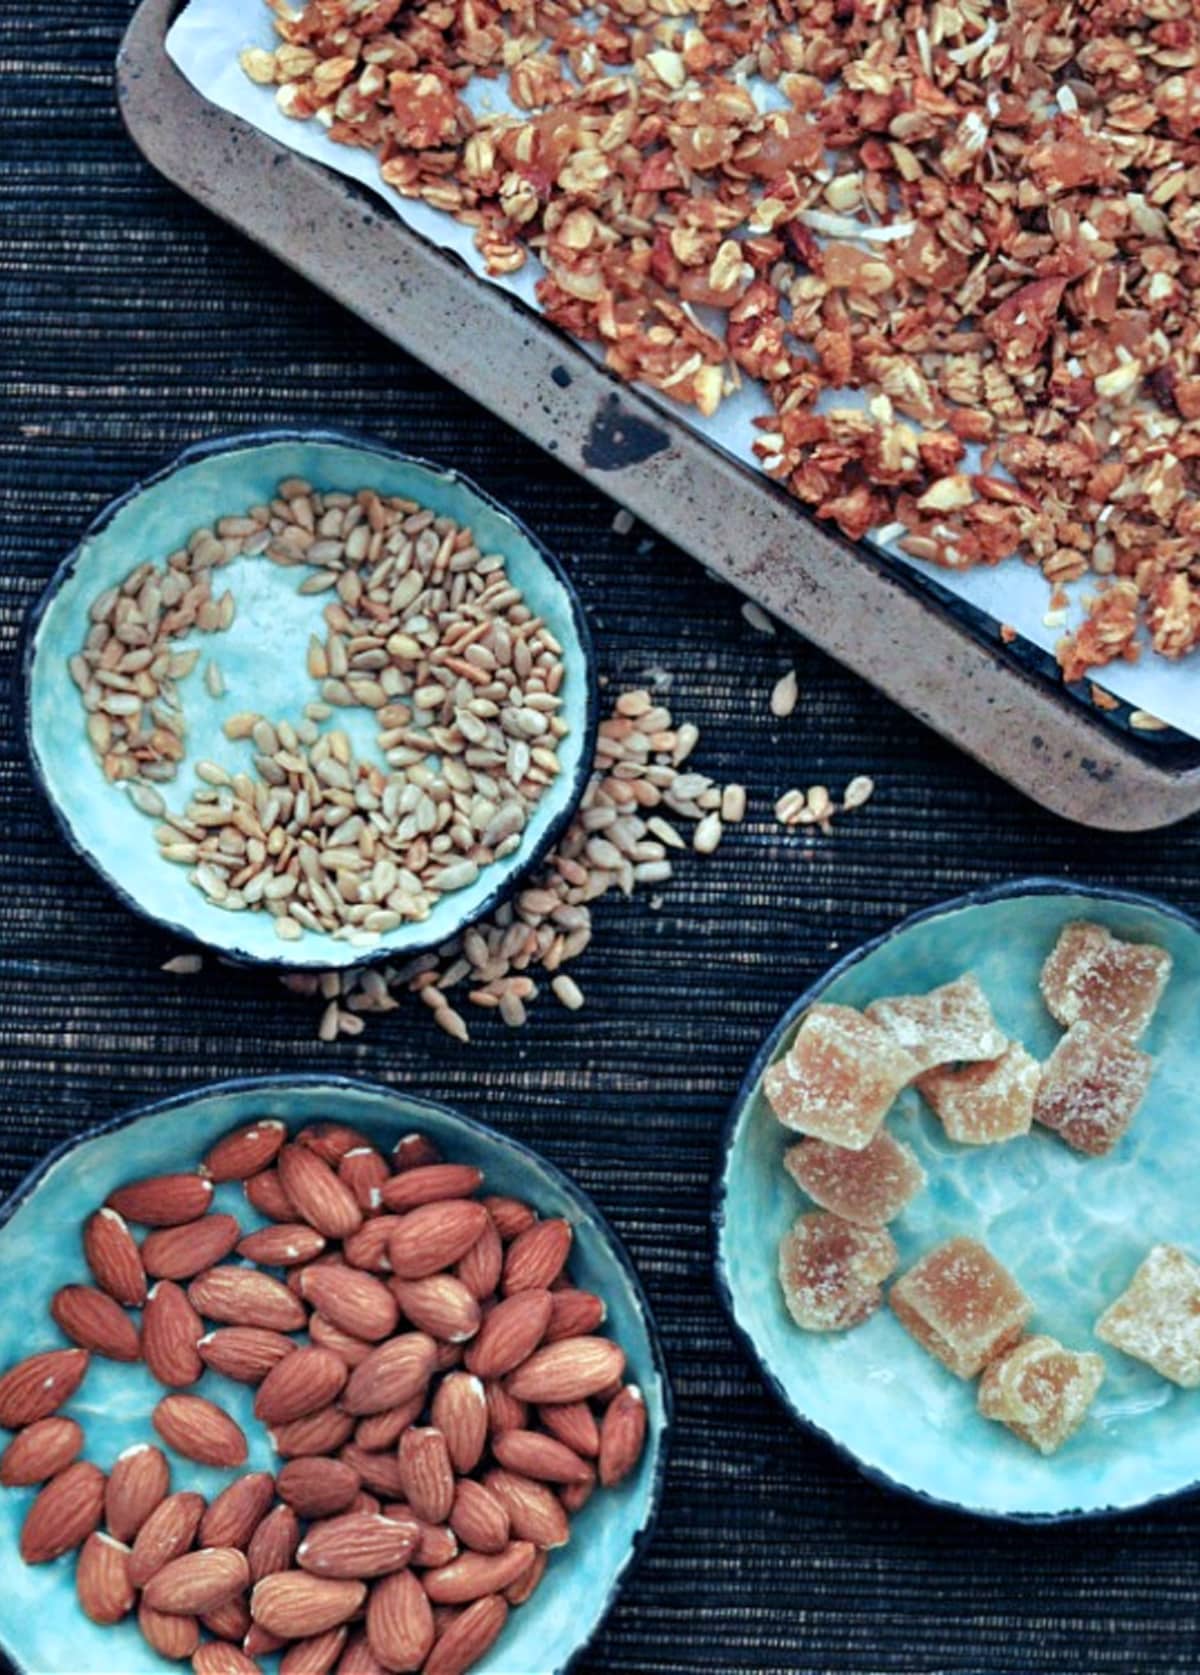 Overhead view of golden colored ginger vanilla granola on a parchment lined baking sheet. Bowls of the individual ingredients next to baking sheet: crystallized ginger, sunflower seeds, almonds.